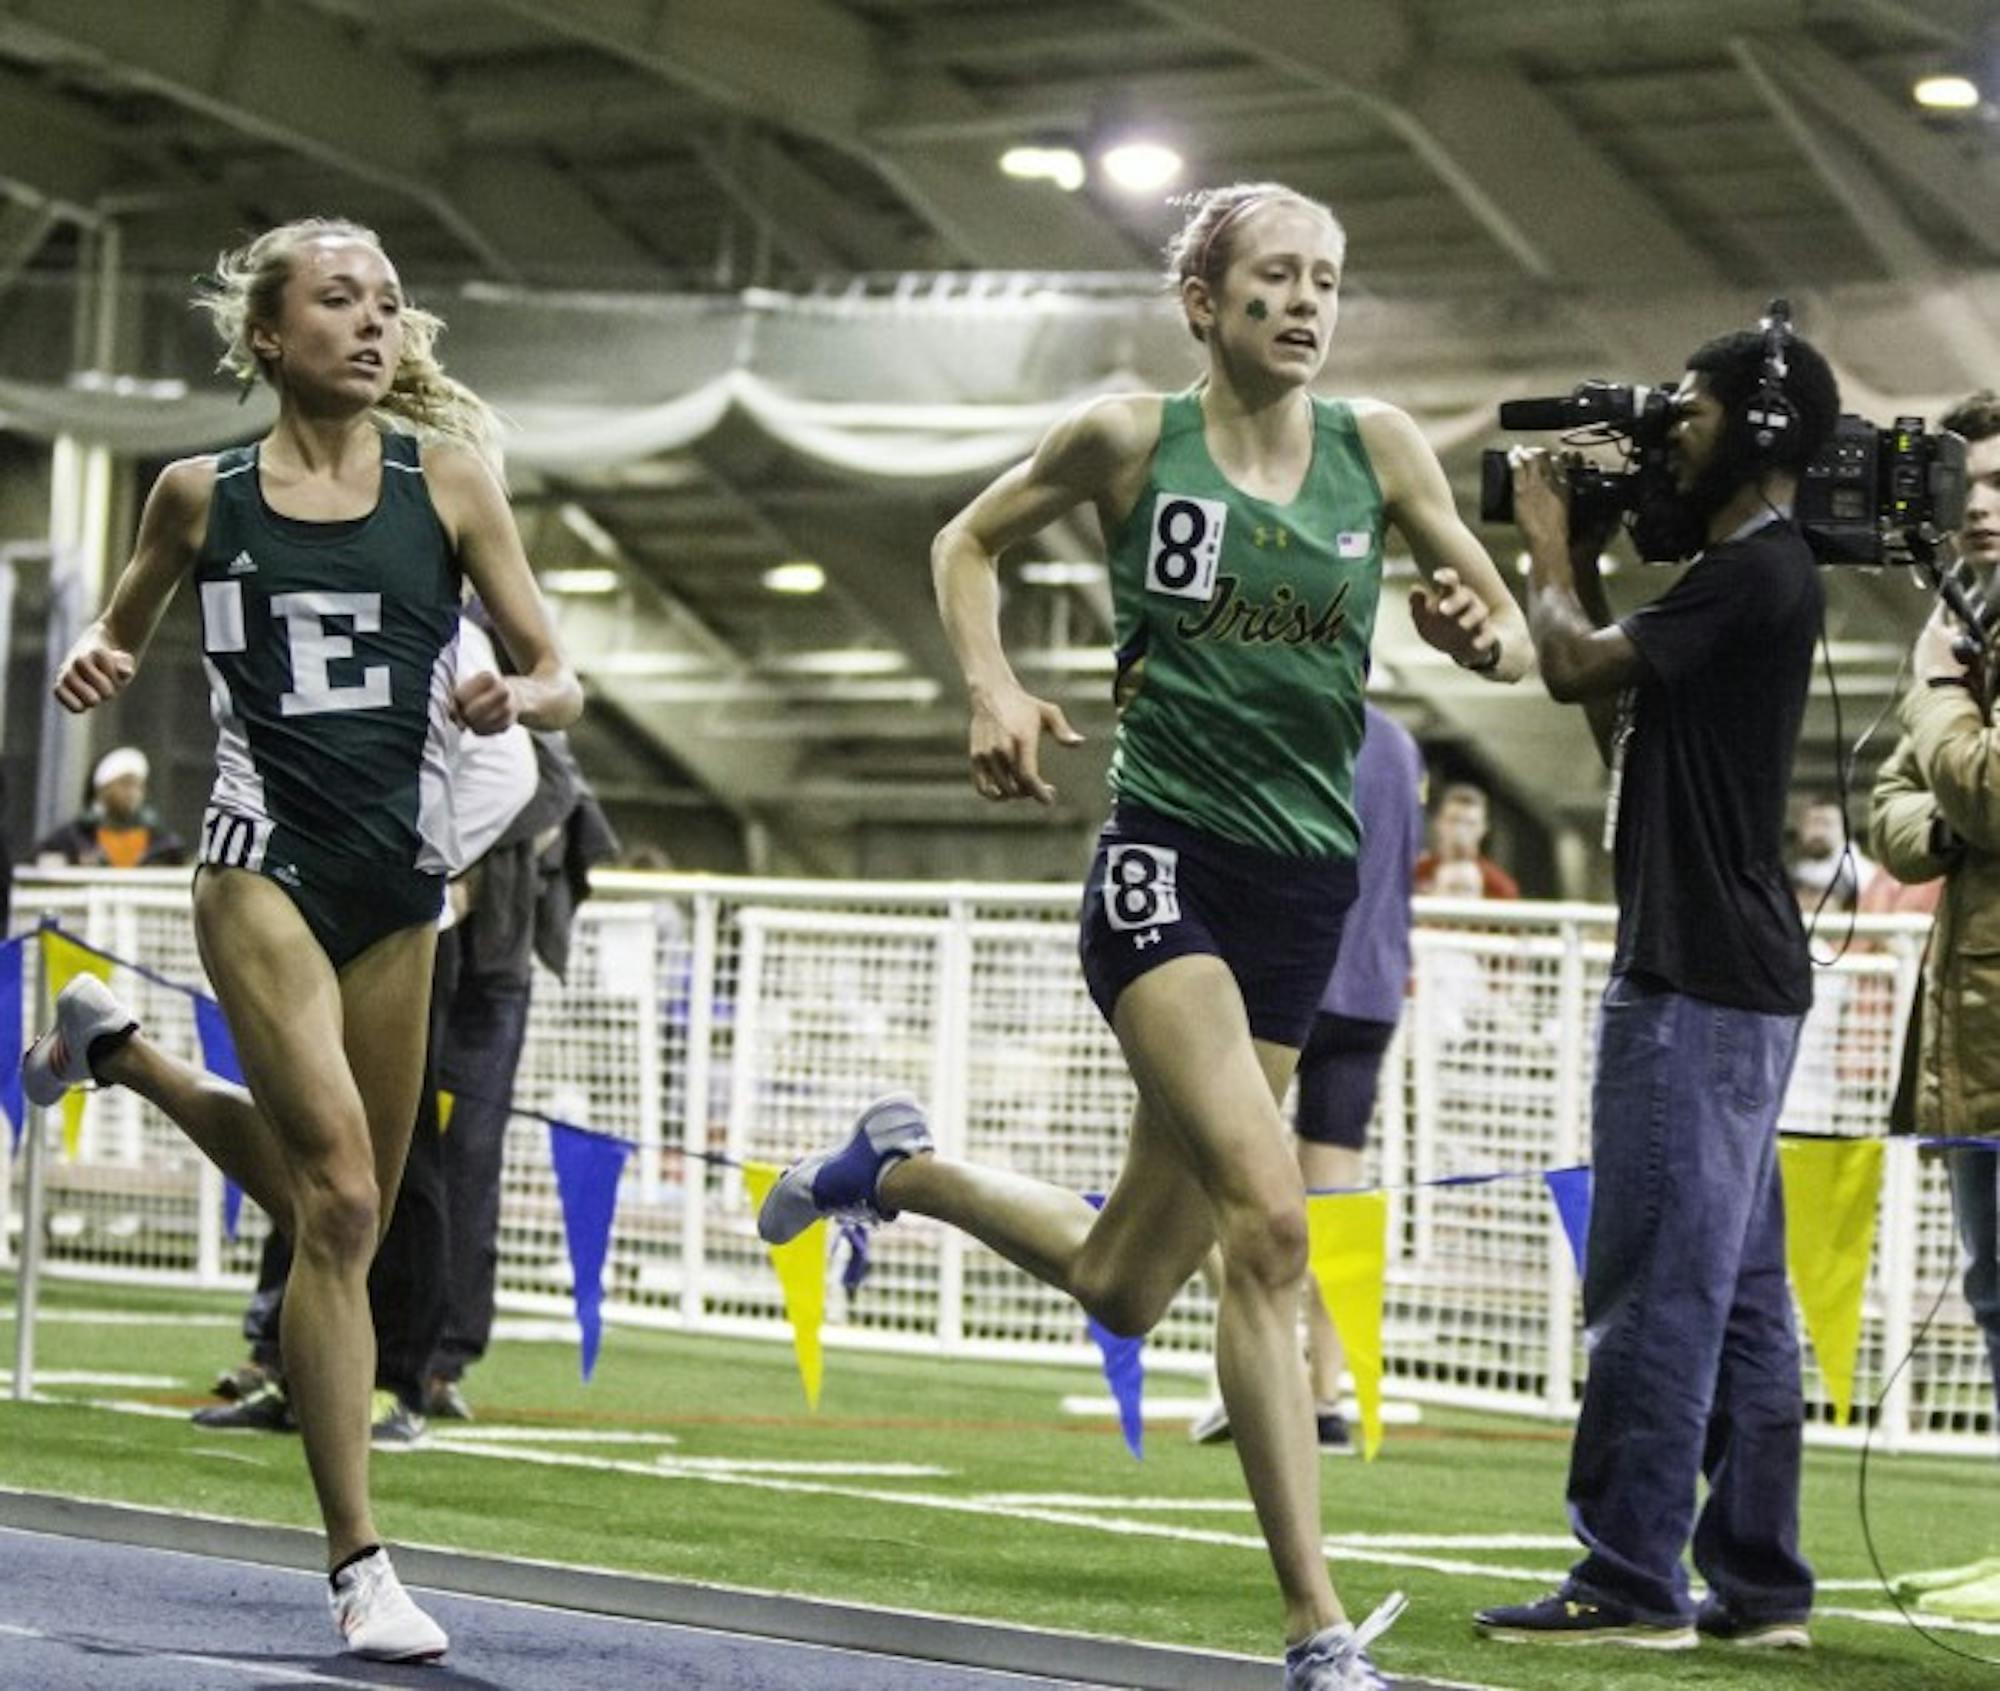 Irish sophomore Anna Rohrer competes in the 3,000-meter race at the Meyo Invitational on Feb. 4 at Loftus Sports Center.